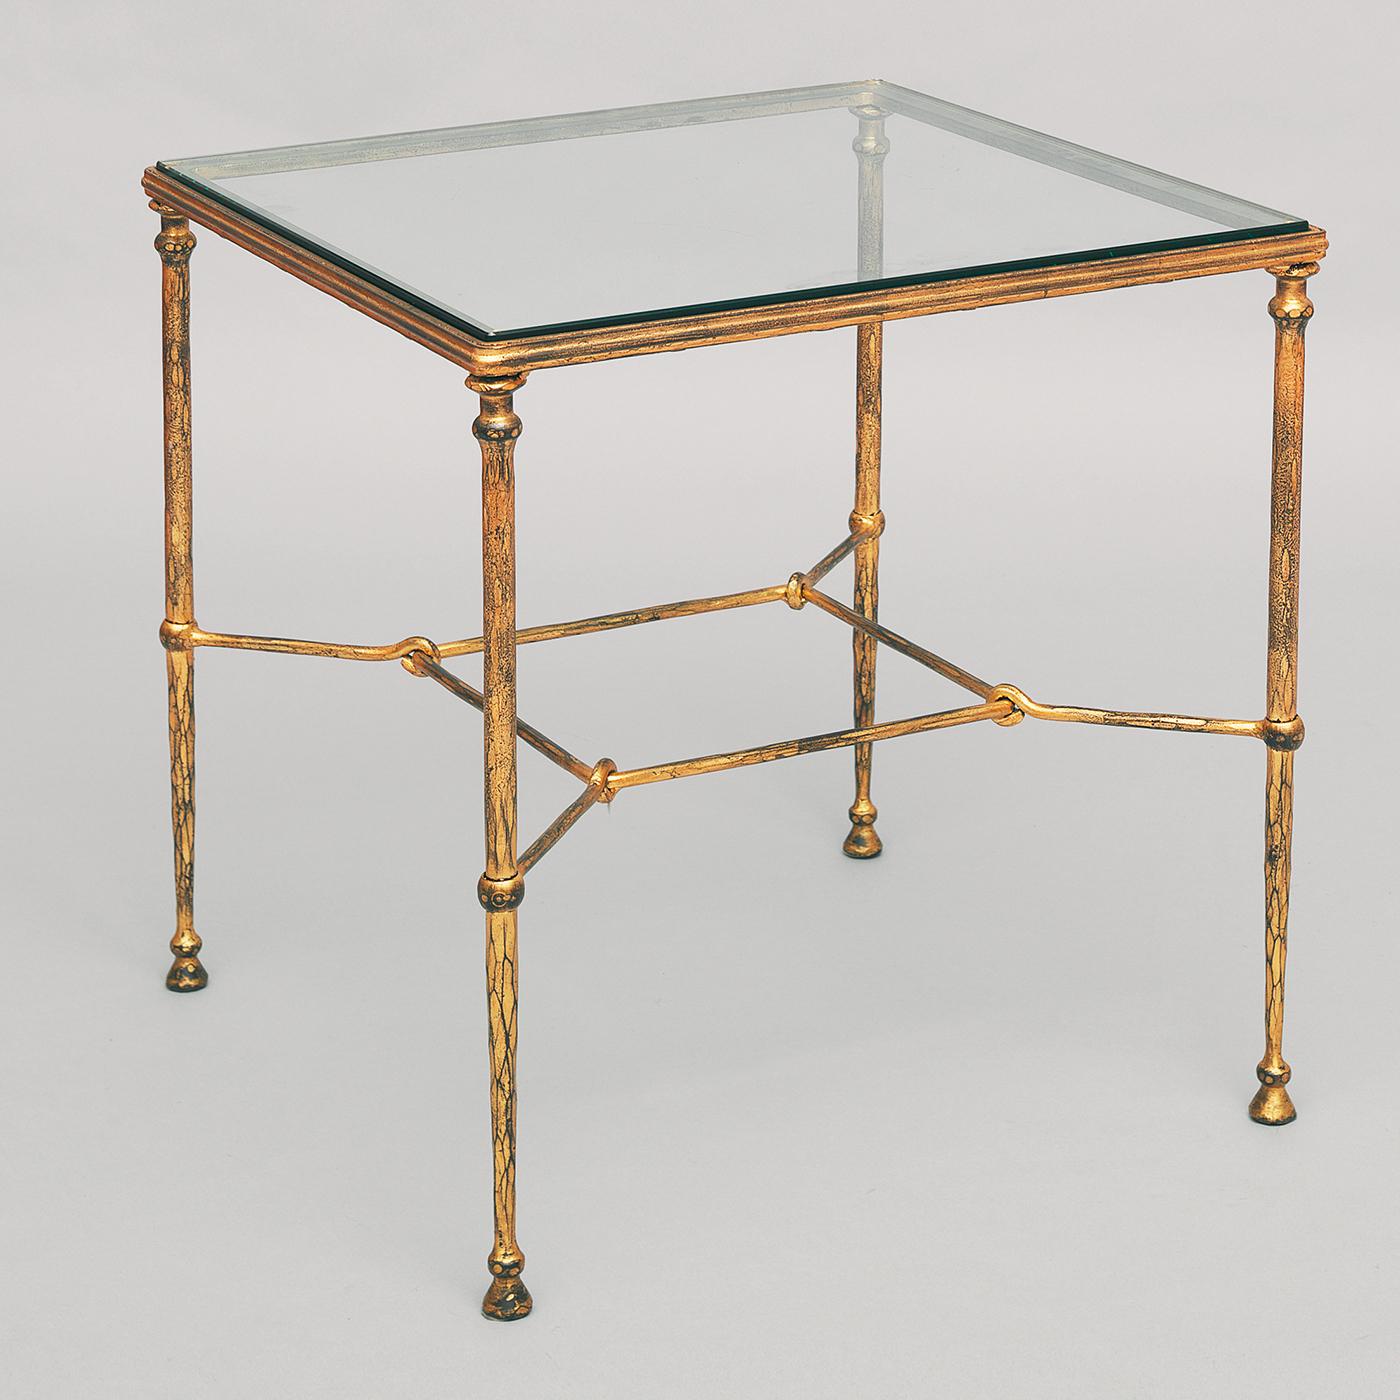 This superb coffee table will make an elegant statement in both traditional and contemporary interiors. The stainless steel structure evokes the splendors of ancient Roman and Etruscan decors, comprising a square crystal top supported by a base with